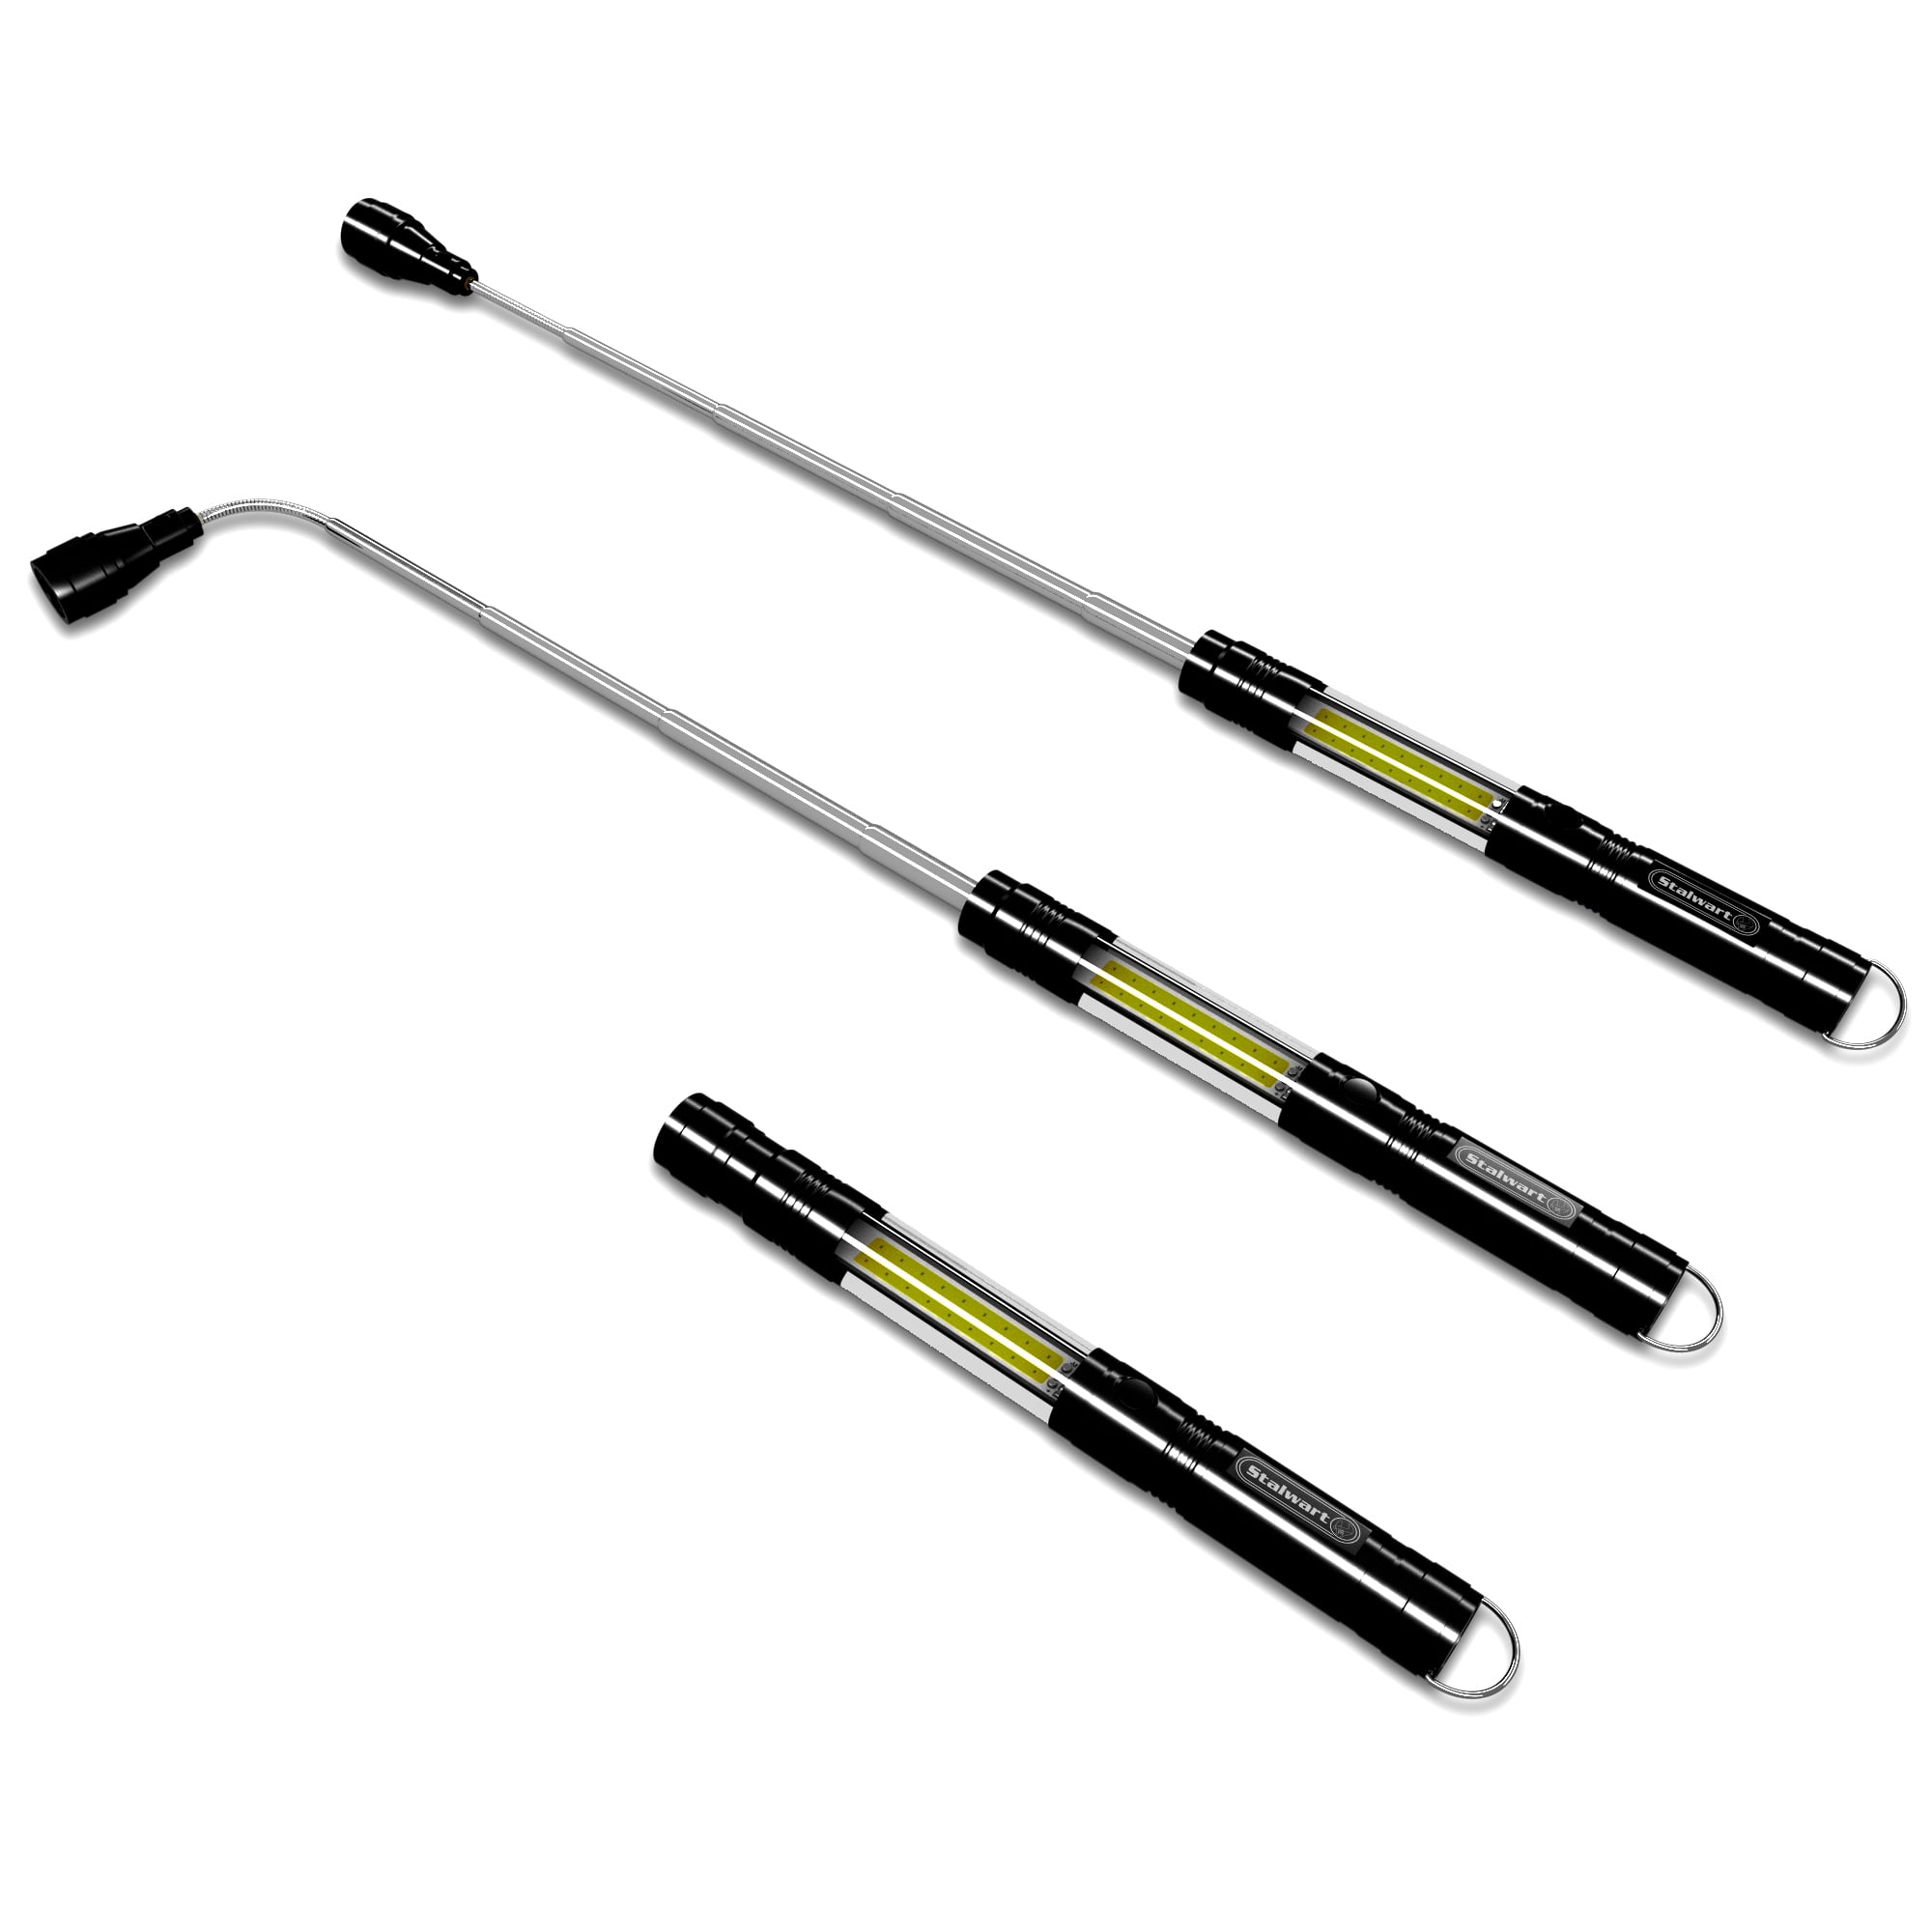 NEW PICK-UP TELESCOPIC MAGNET WITH LED TORCH LIGHT 8 LB LONG MAGNETIC EXTEND ROD